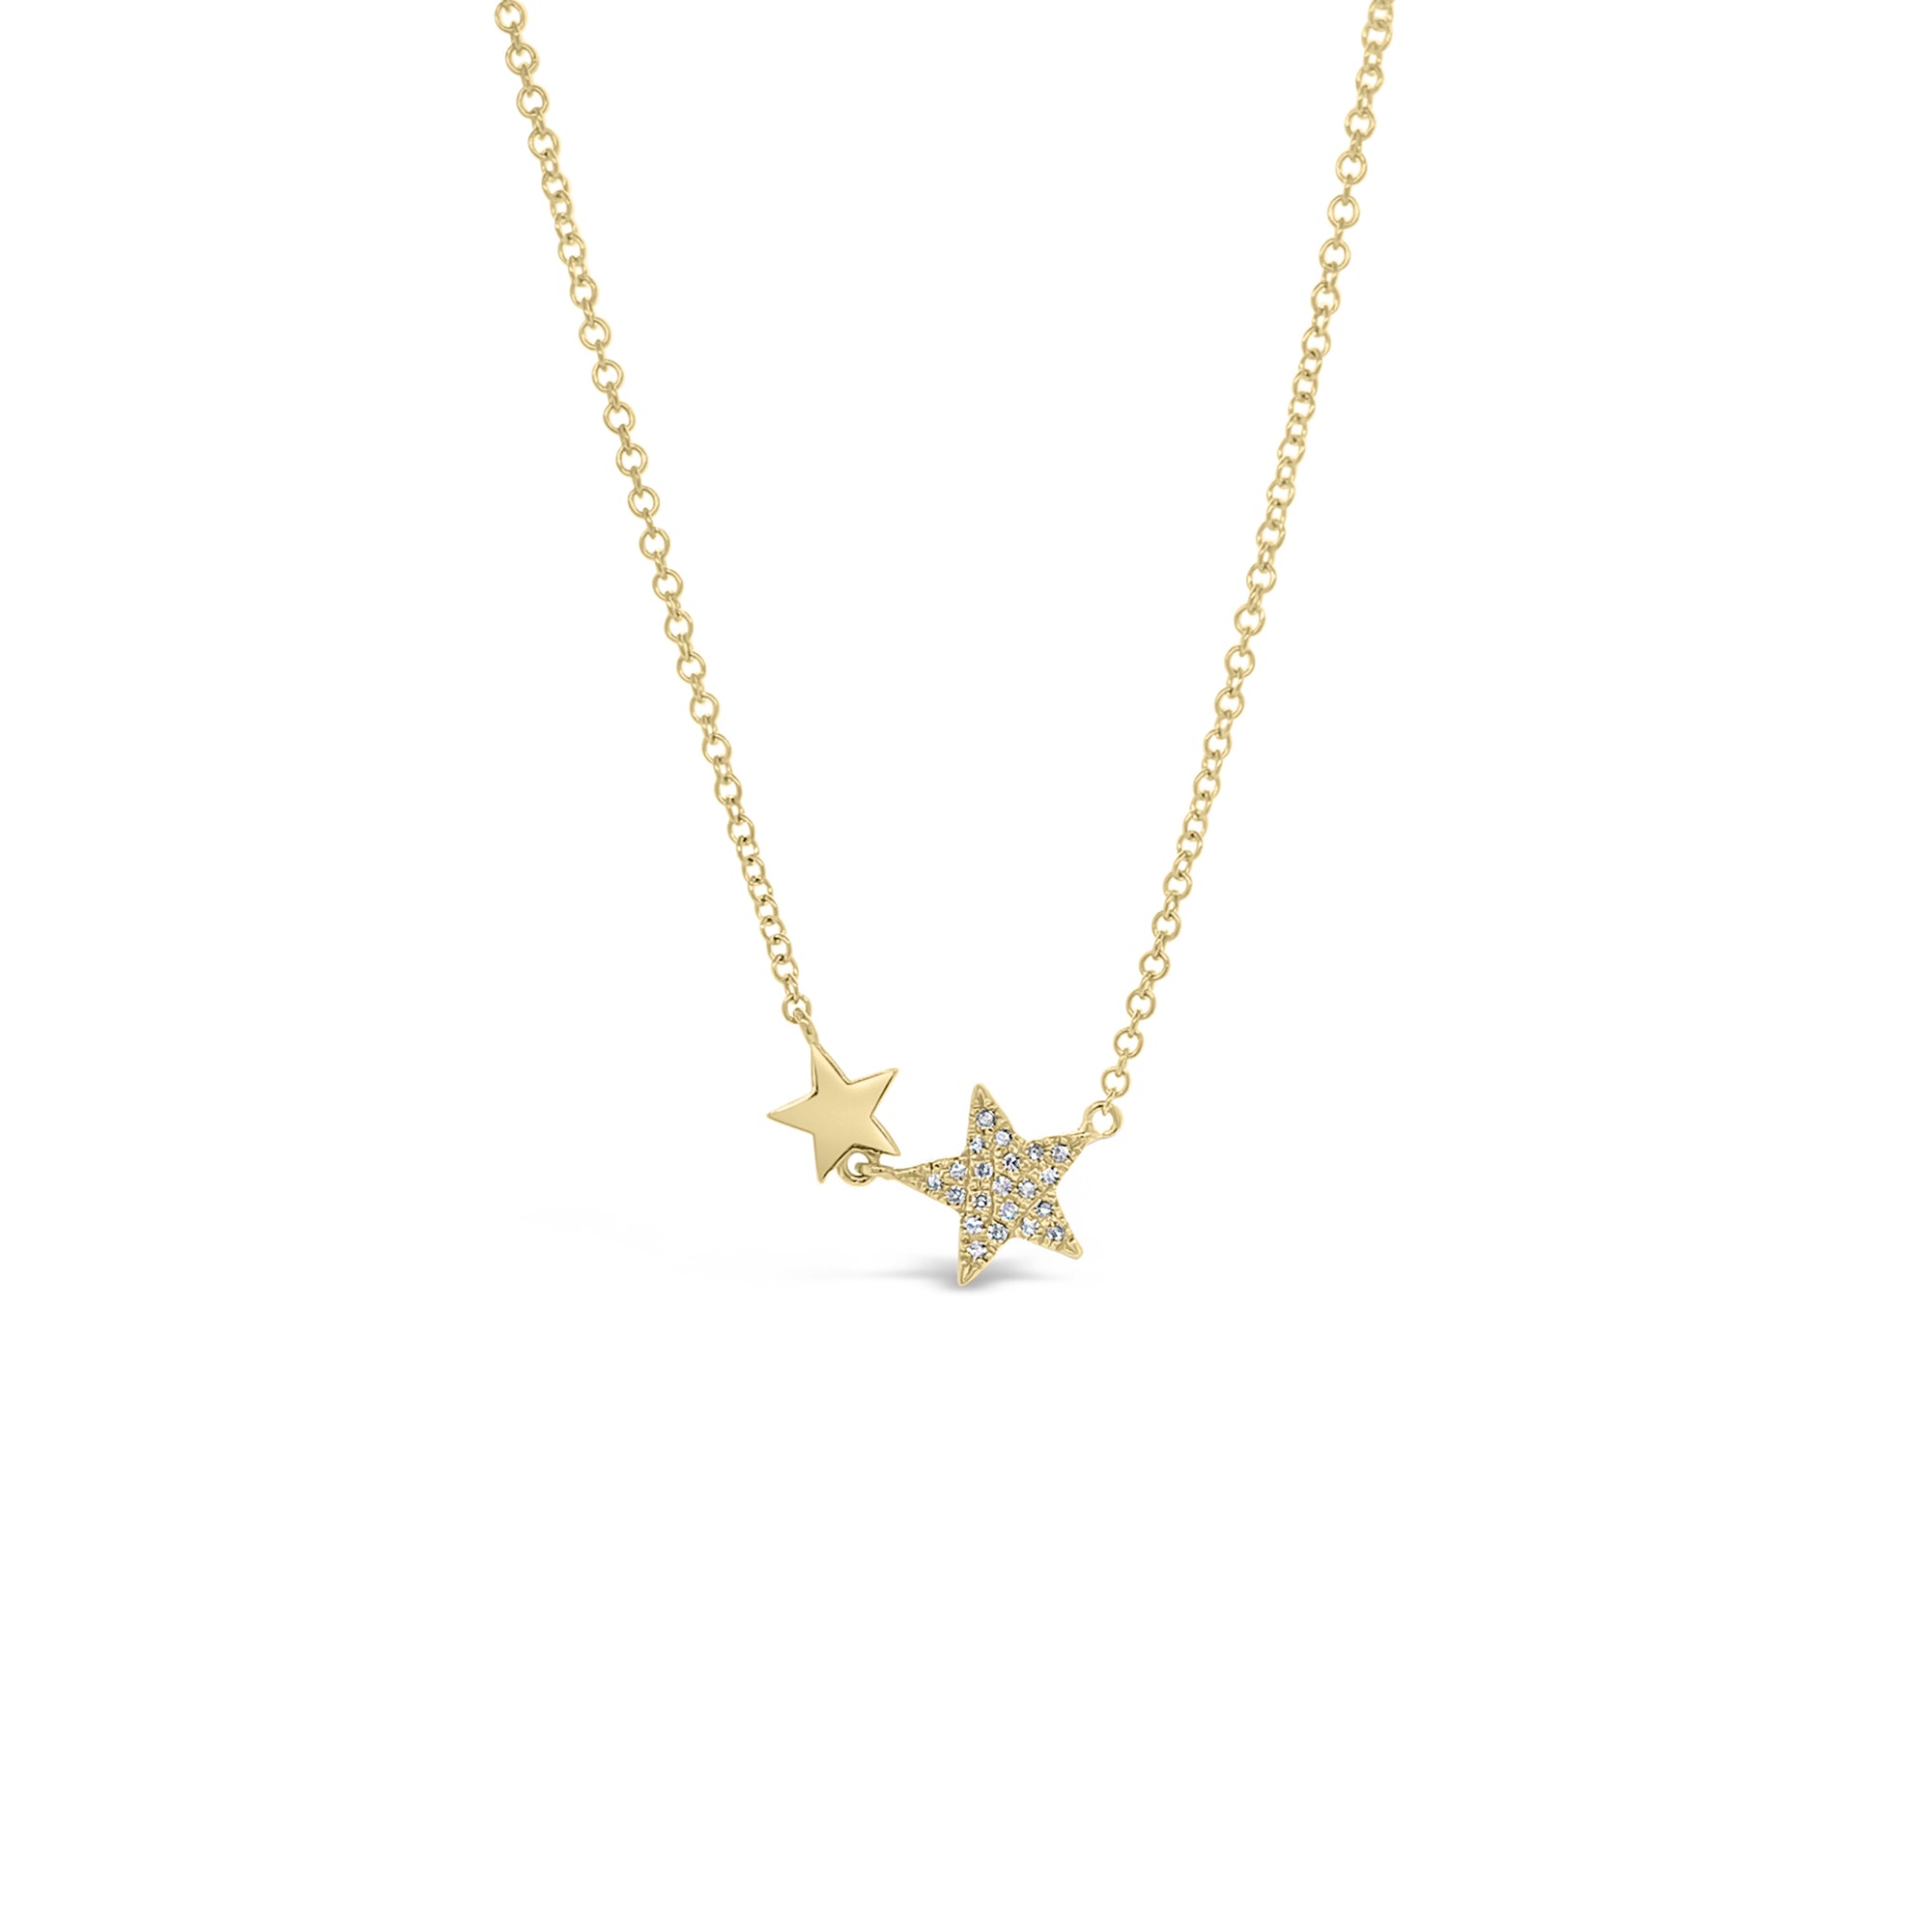 Diamond Double Star Necklace  - 14K gold weighing 1.82 grams  - 21 round diamonds totaling 0.05 carats